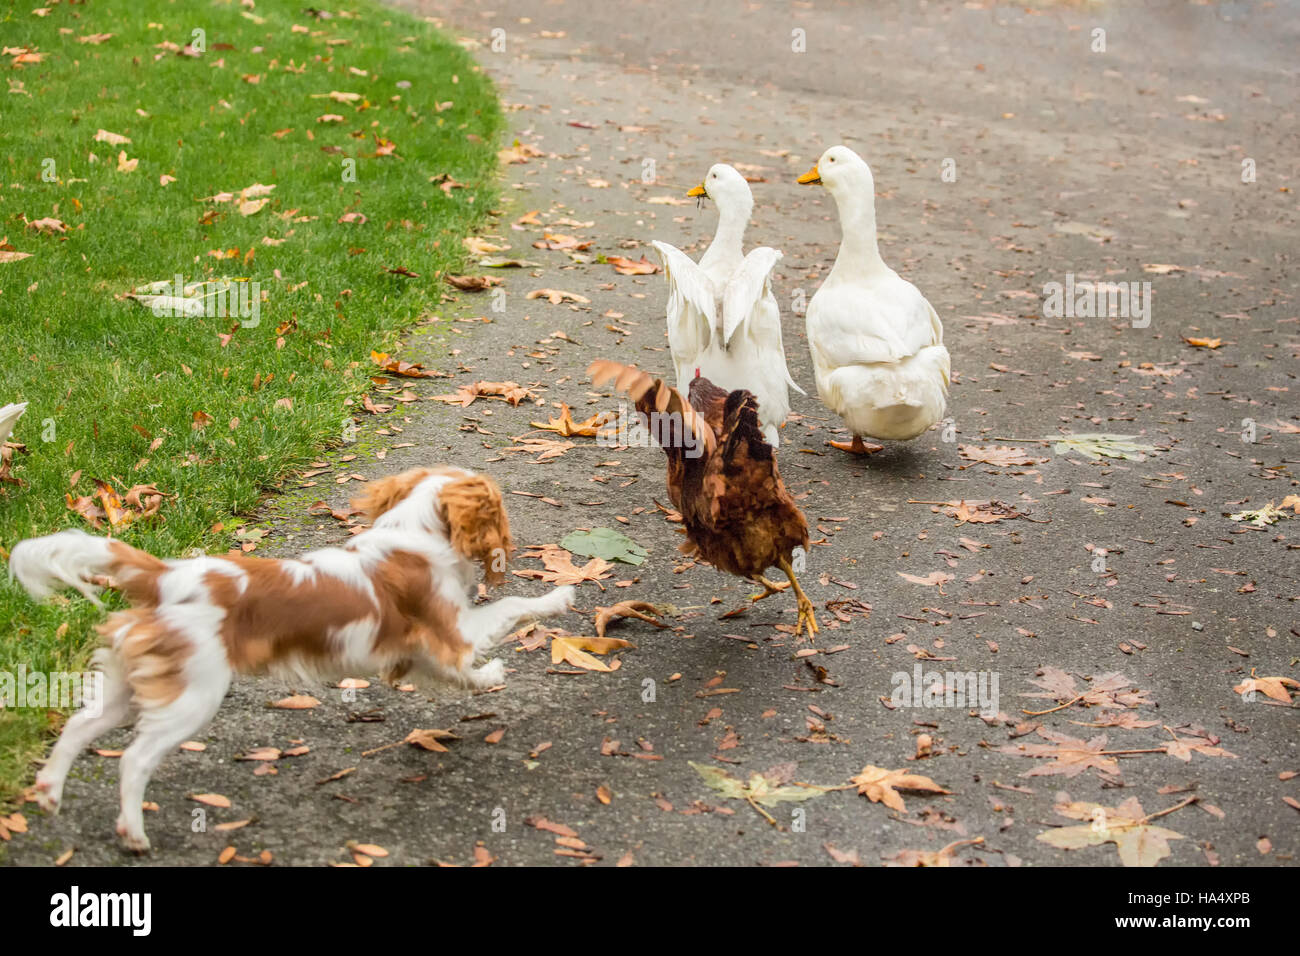 Six month old Cavalier King Charles Spaniel puppy chasing free-ranging Pekin ducks and a Rhode Island Red chicken on an Autumn day Stock Photo